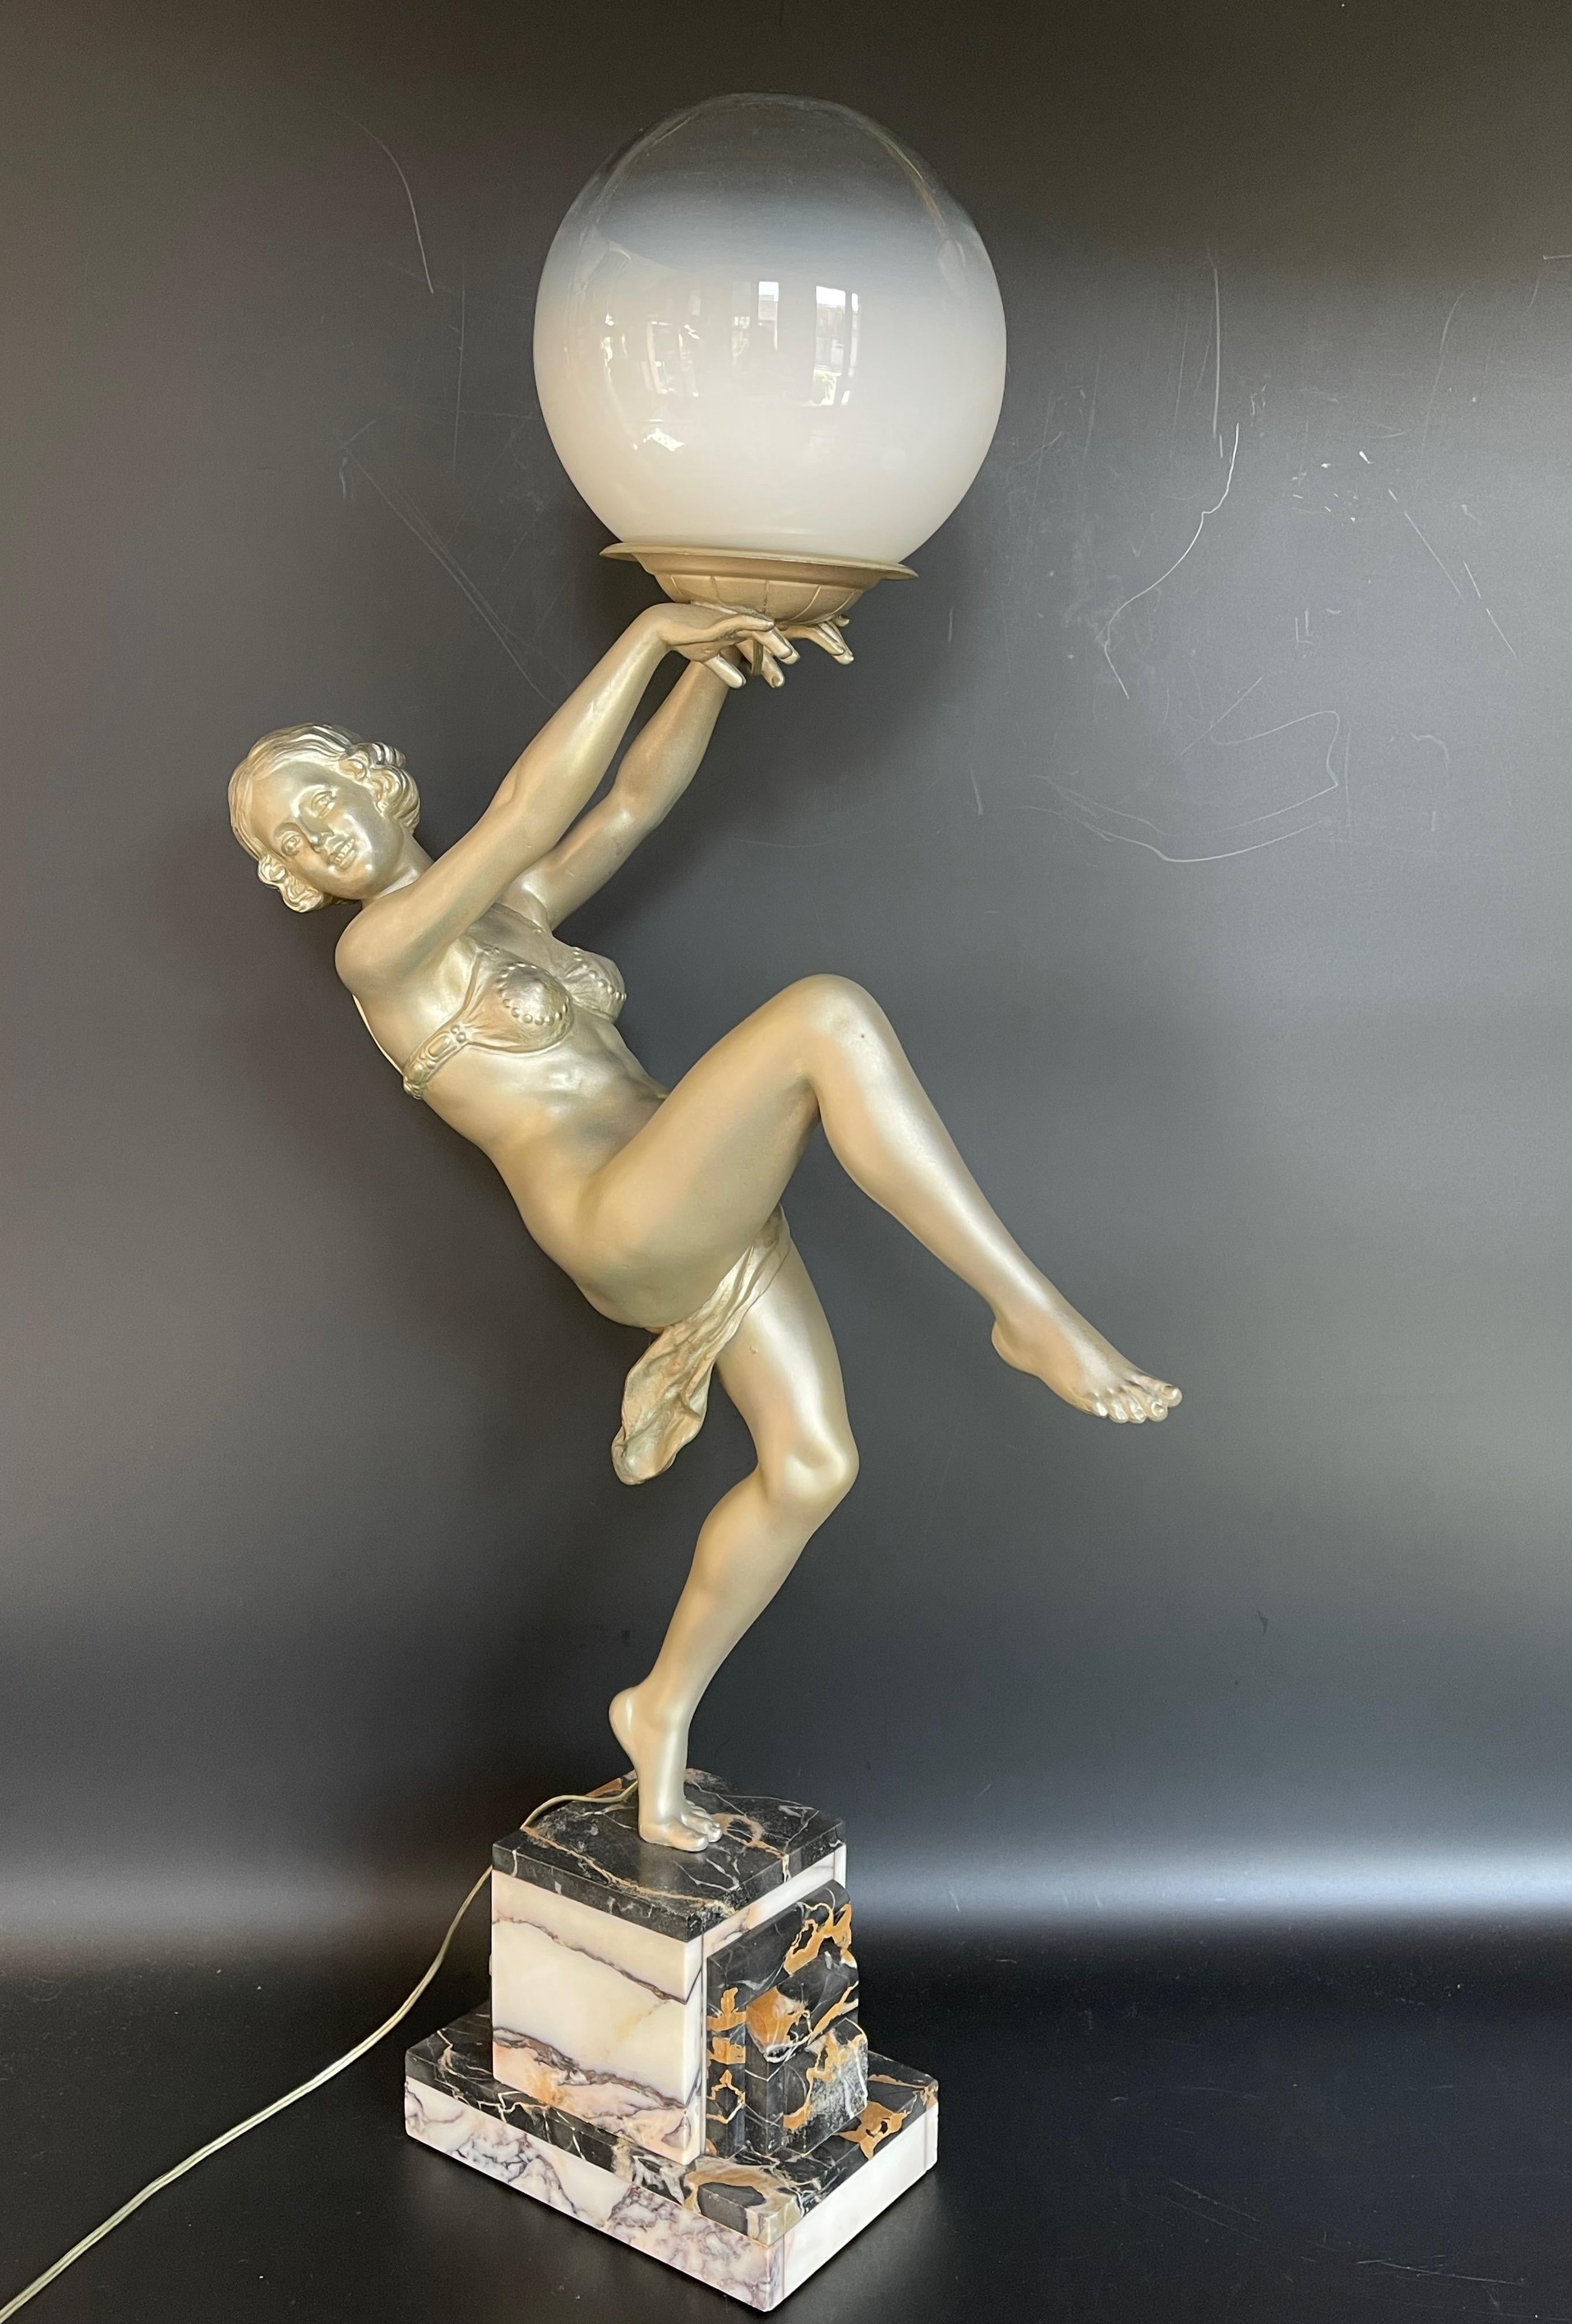 Large art deco illuminating sculpture, circa 1930.
Spelter sculpture on marble base.
Opalescent glass ball soap bubble.
In perfect condition and electrified
Length: 17,5 cm
Diameter: 15 cm
Height: 71 cm
Depth: 10,5 cm
Weight: 7kg

Sculptor